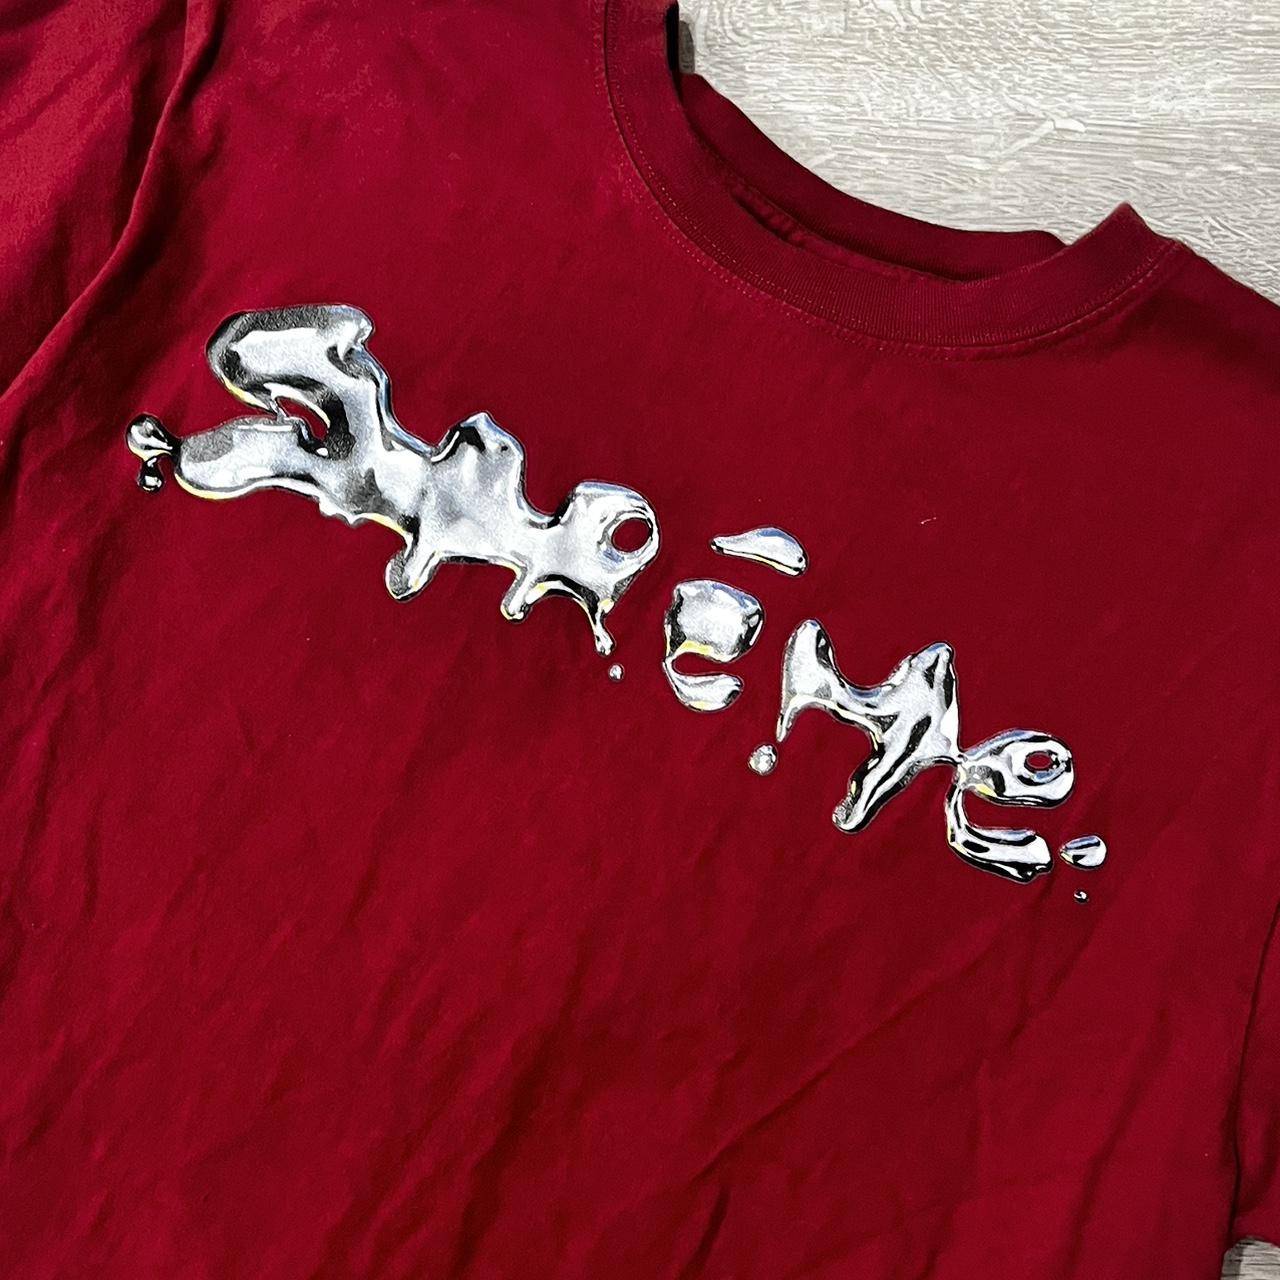 Supreme Men's Red and Silver T-shirt